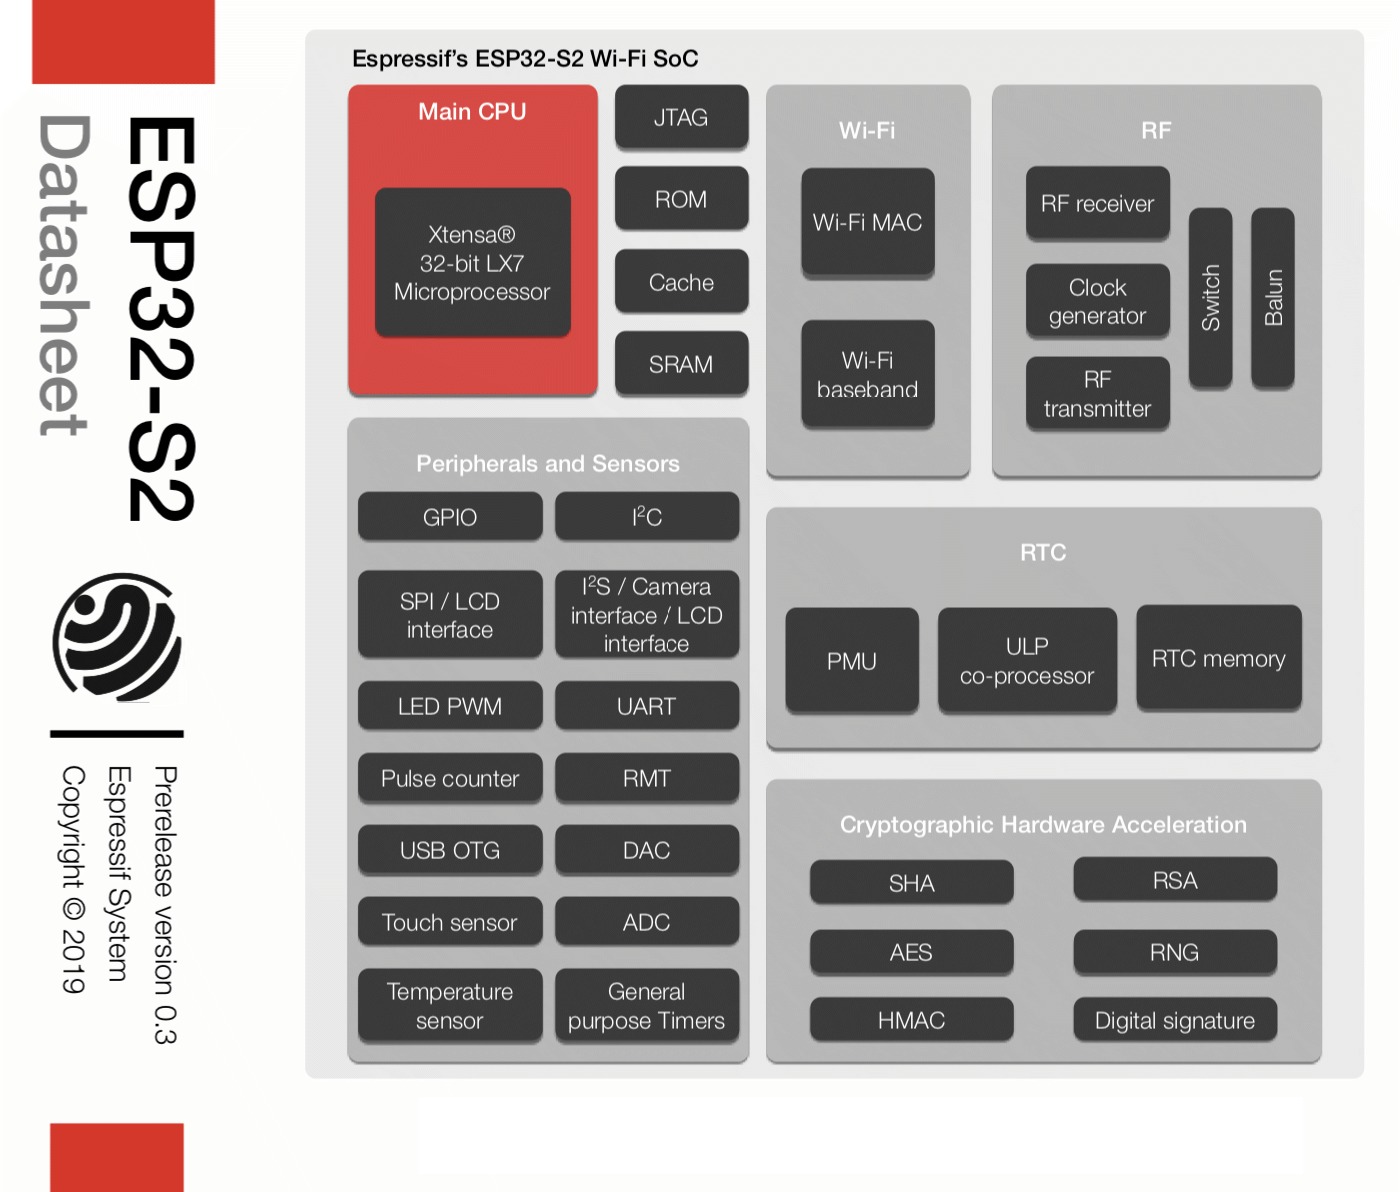 Espressif Next Gen ESP32-S2 SoC and family goes into Mass Production